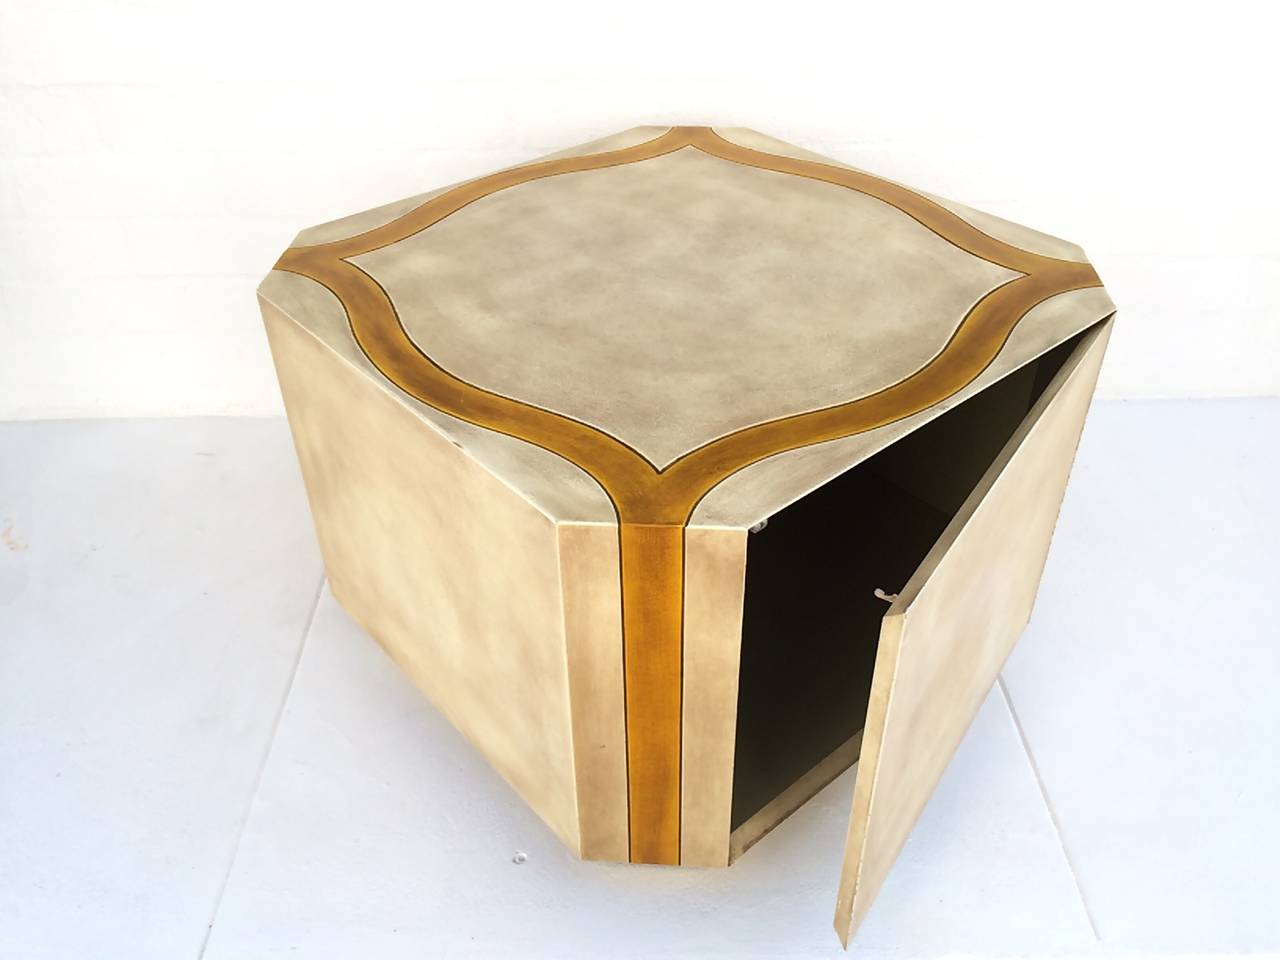 A bedside cabinet designed by Phyllis Morris. 
The hidden door is opened by pushing it to reveal storage. 
Signed Phyllis Morris on the inside, 
circa 1960s.